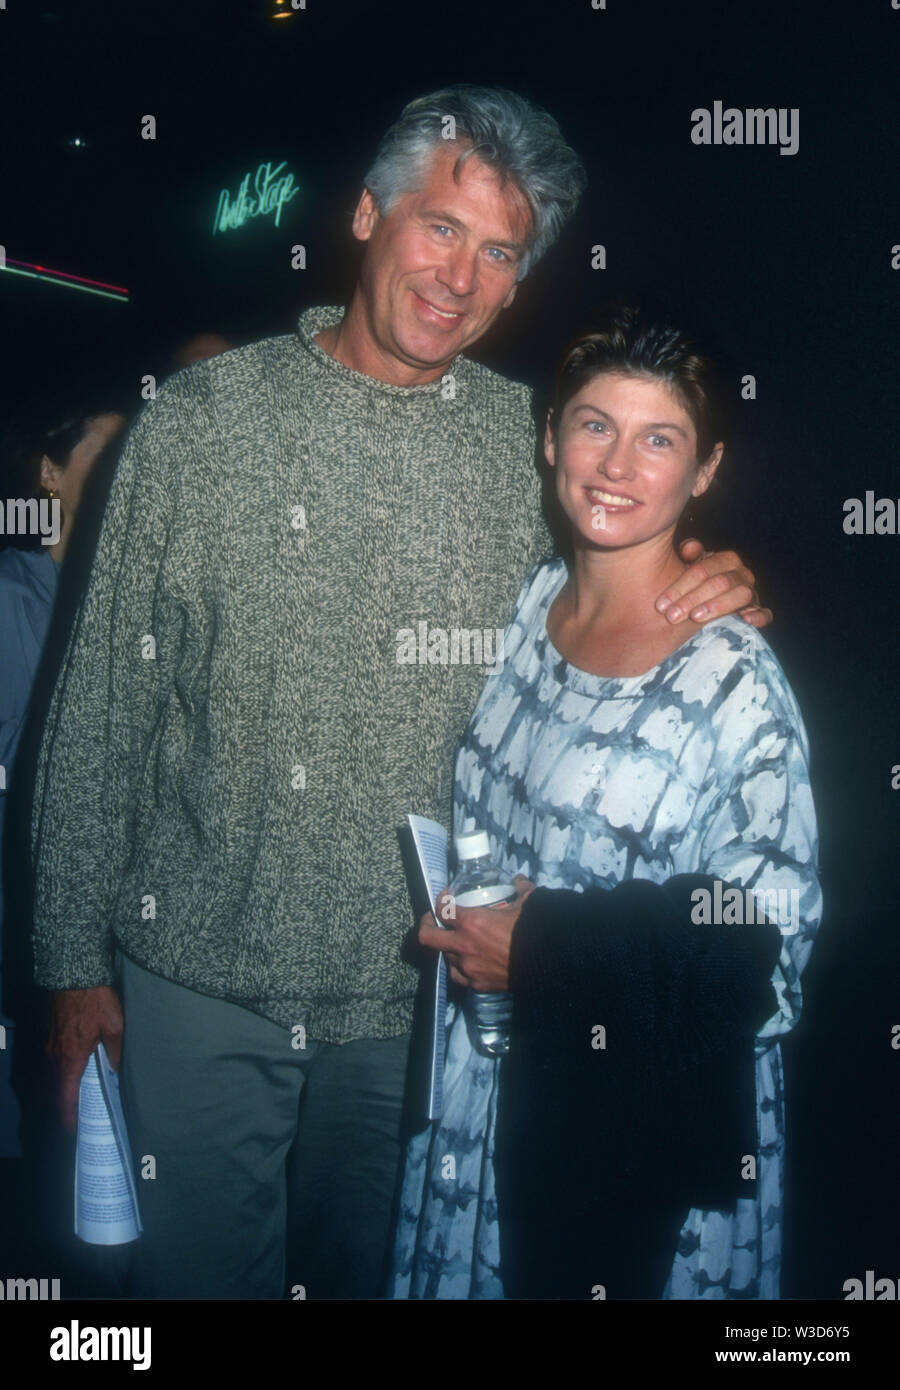 West Hollywood, California, USA 22nd September 1994 Actor Barry Bostwick  and wife Sherri Jensen attend the opening of Marvin's Room on September 22,  1994 at Tiffany Theater in West Hollywood, California, USA.